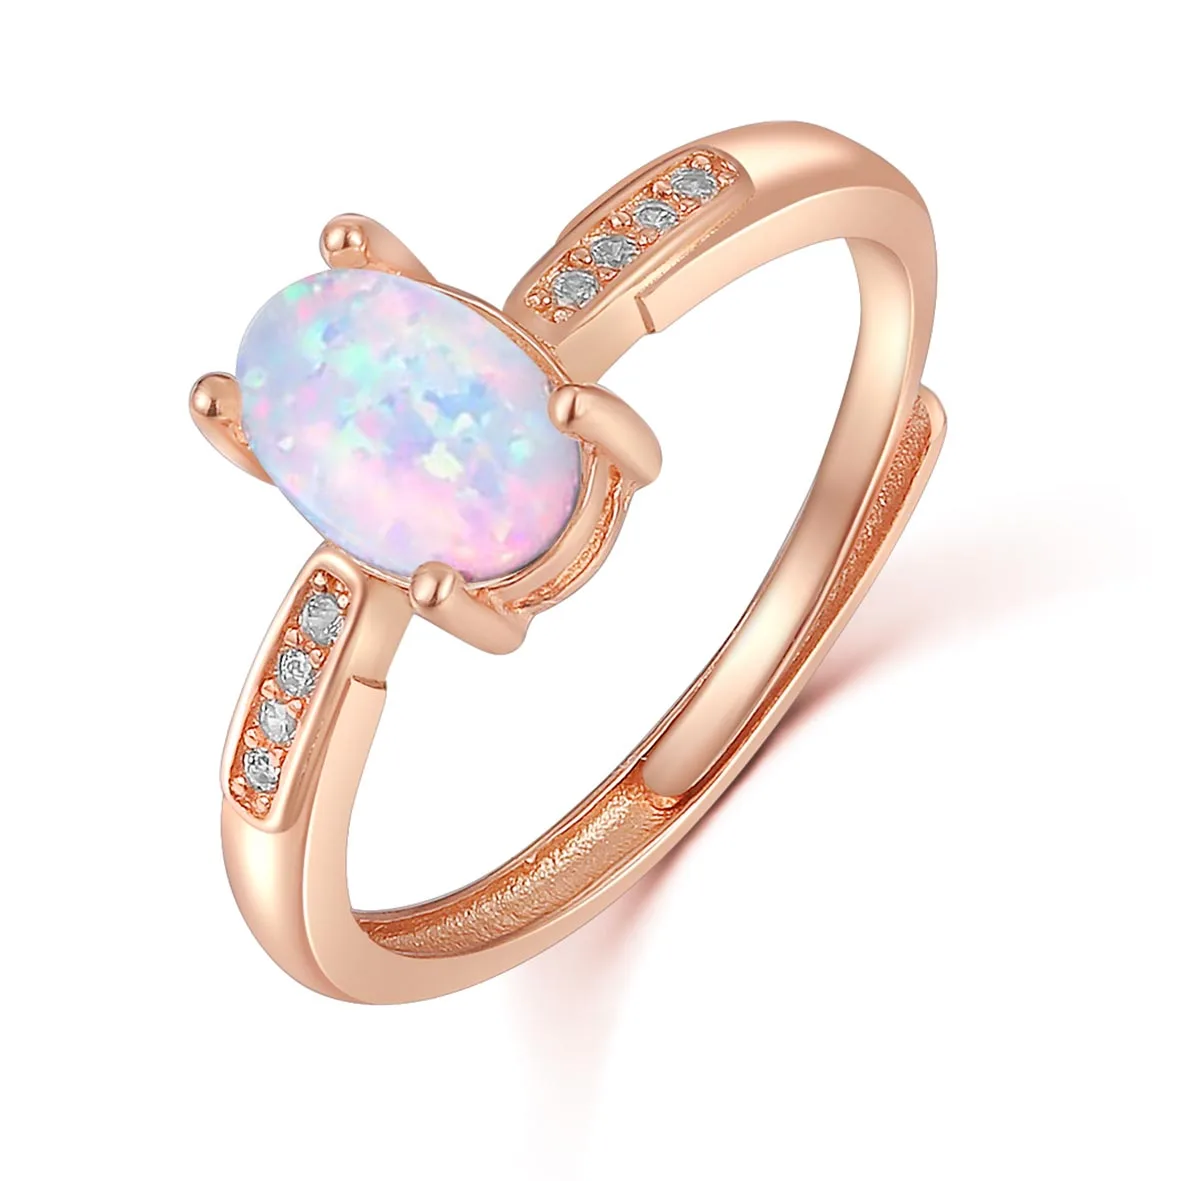 

Beautiful Rose Gold Plated 925 Sterling Silver 1.25ct Natural Australia White Opal Jewelry Fire Opal Solitaire Ring